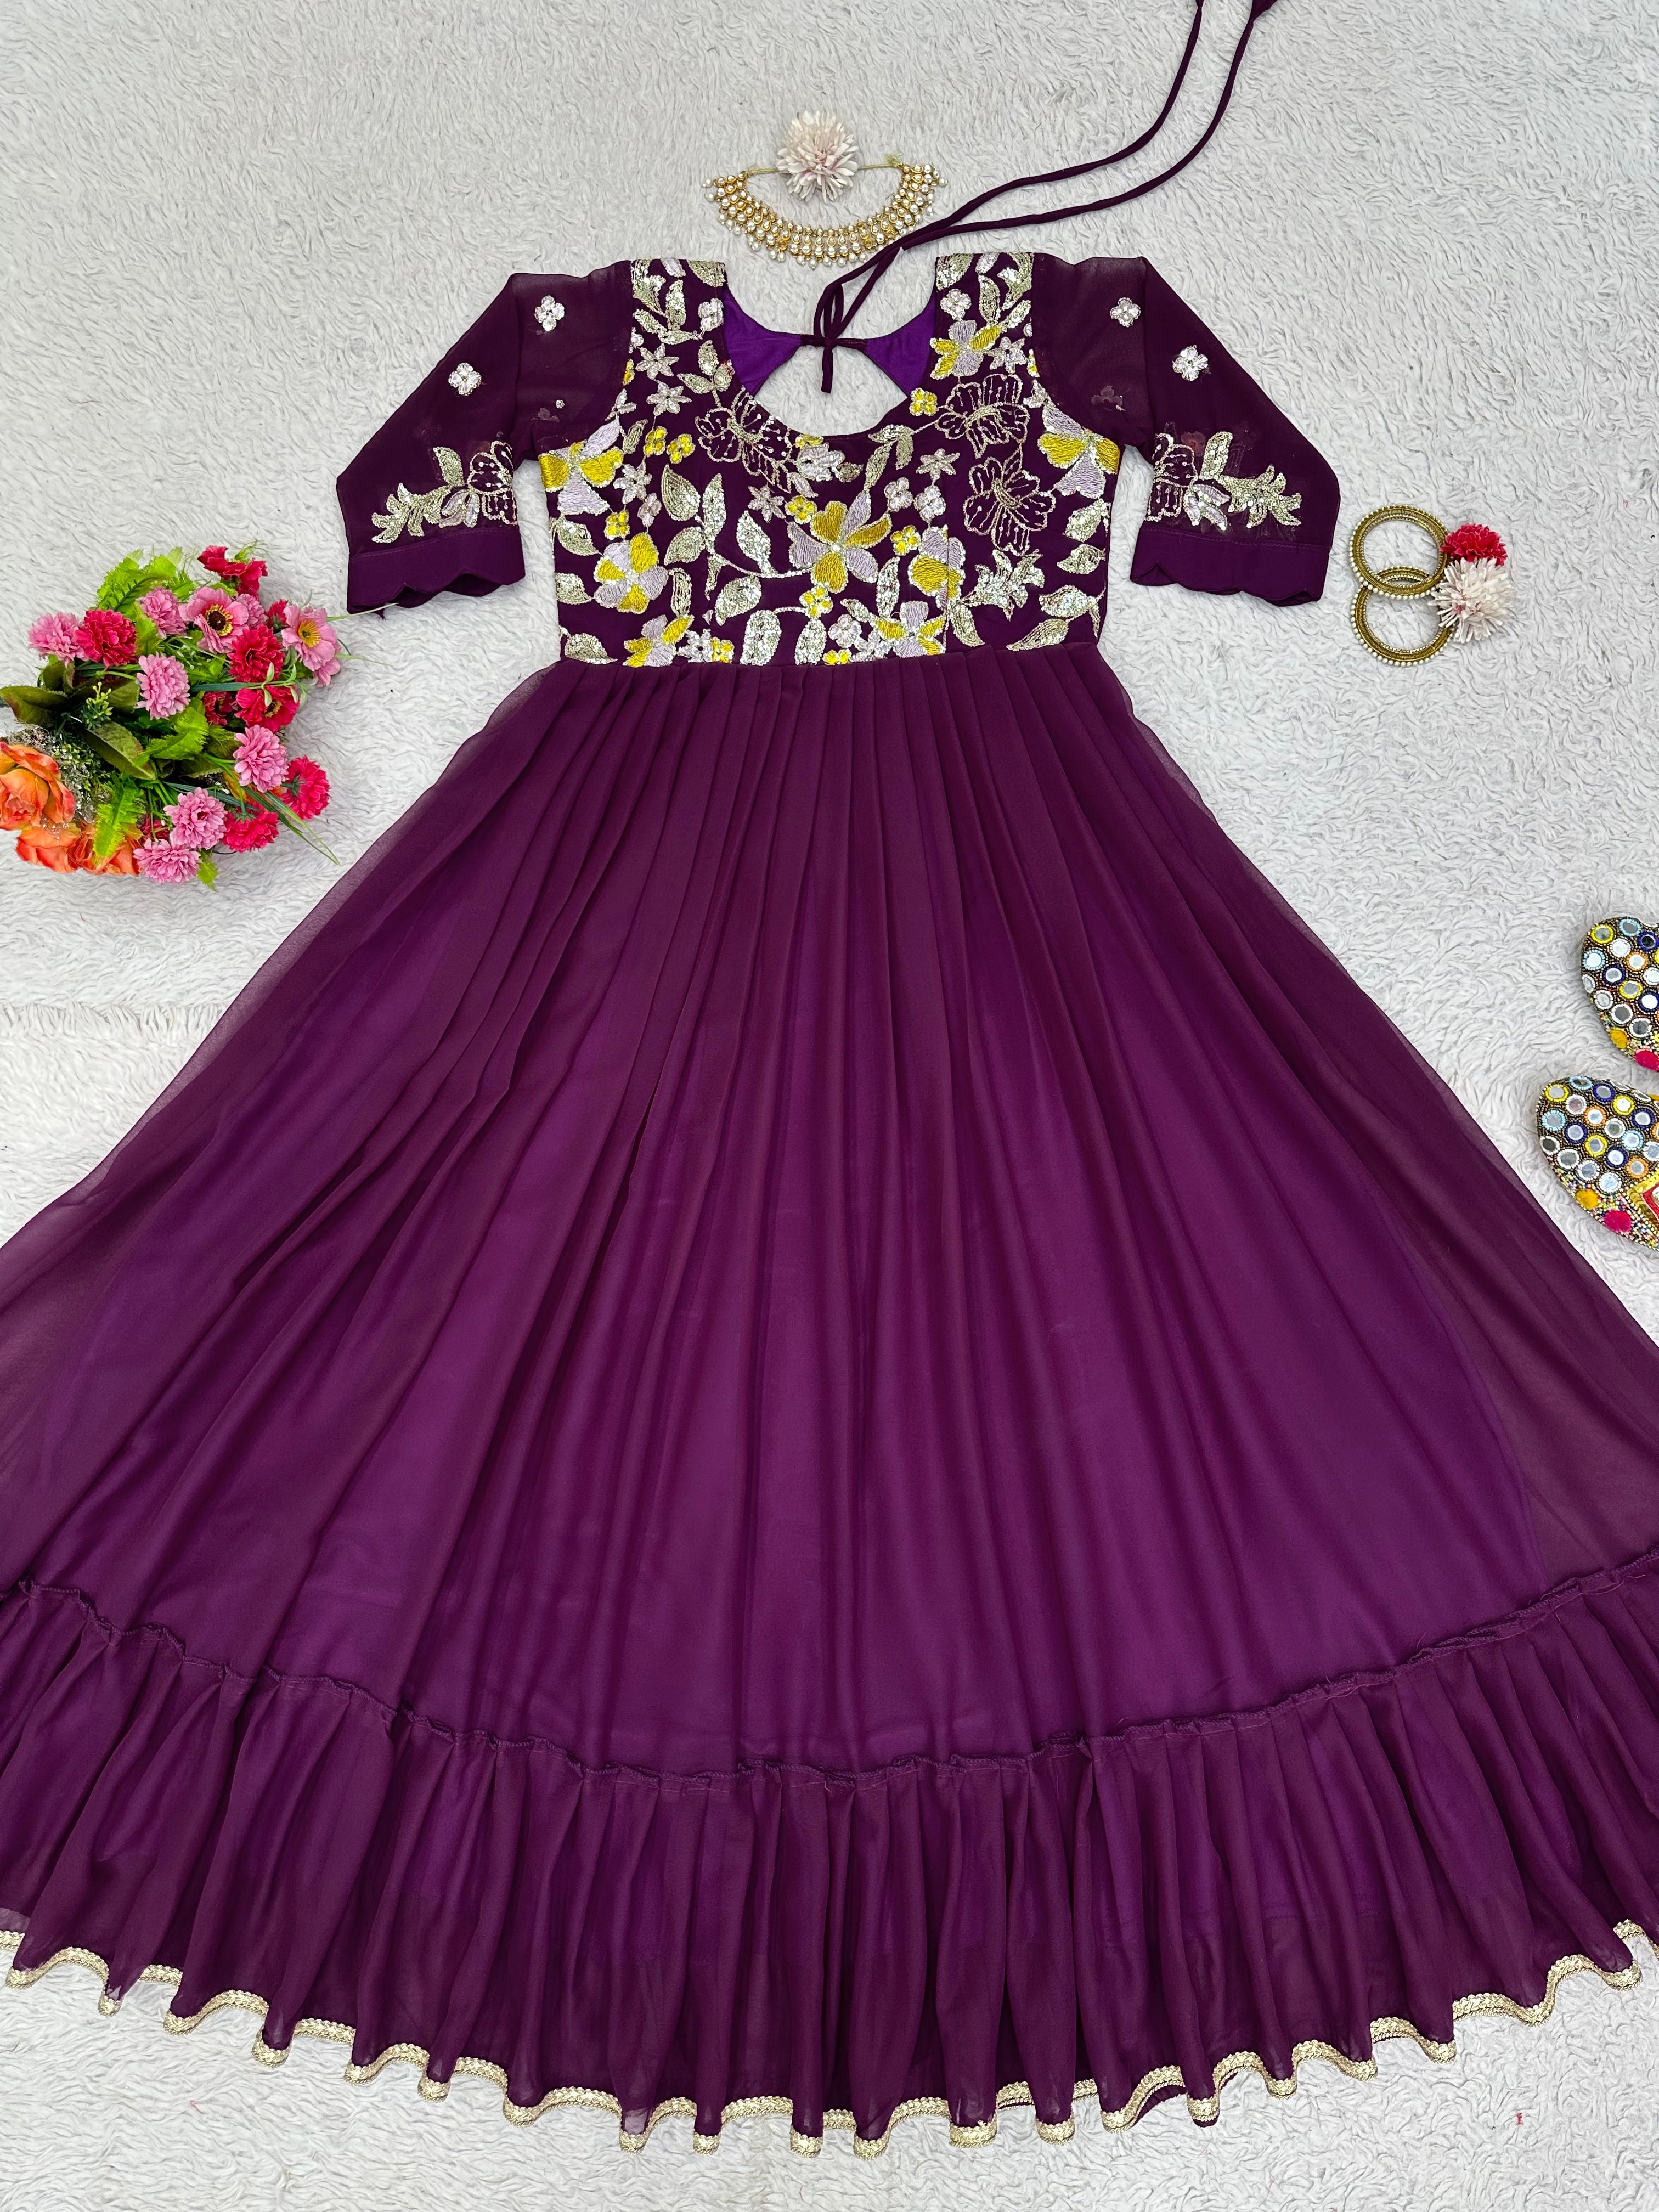 Wine Color Embroidery Work Party Wear Ruffle Gown